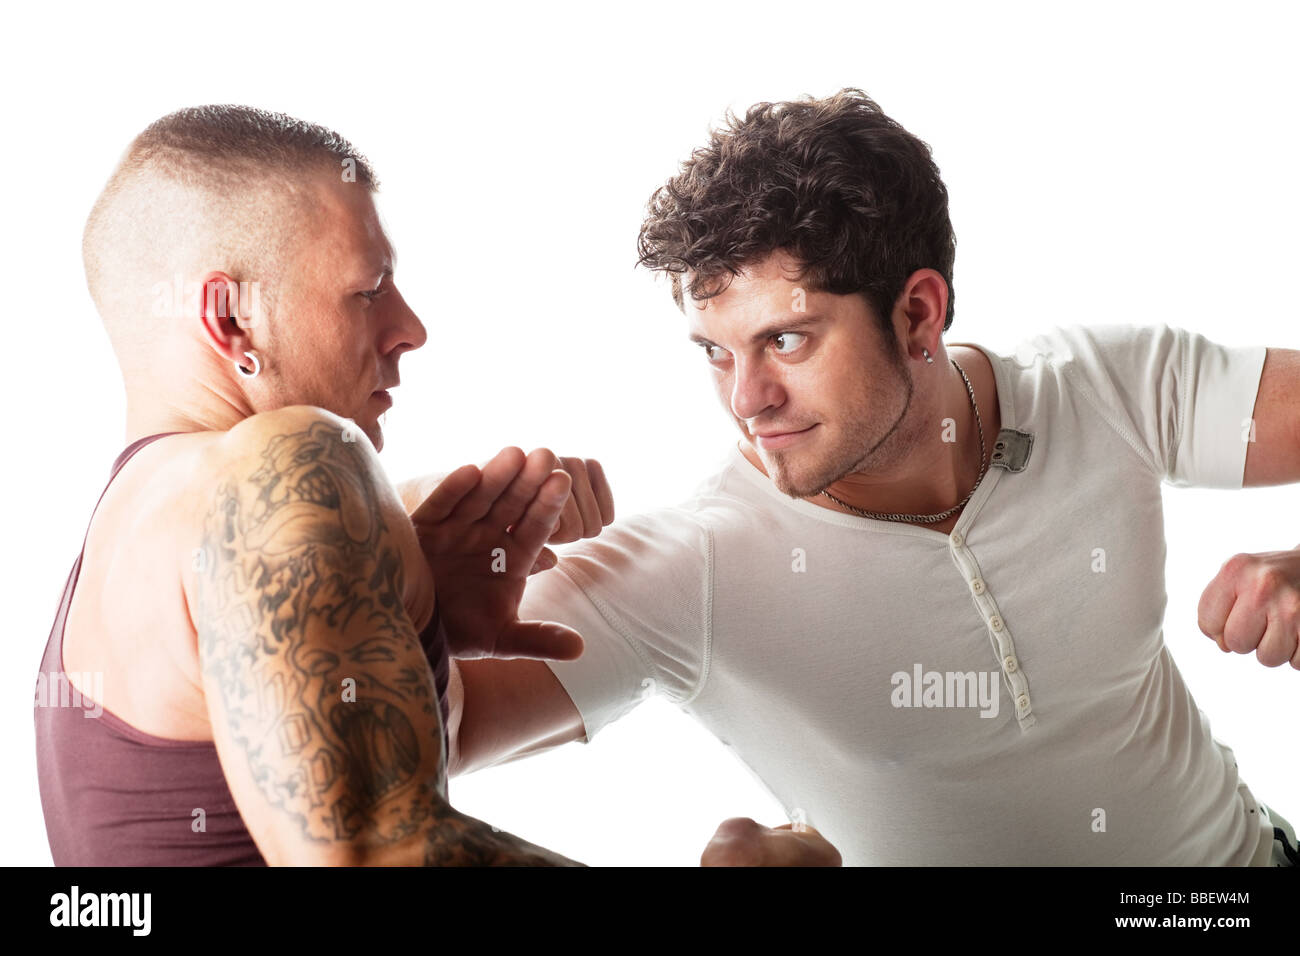 two-muscular-men-fighting-isolated-on-white-background-BBEW4M.jpg